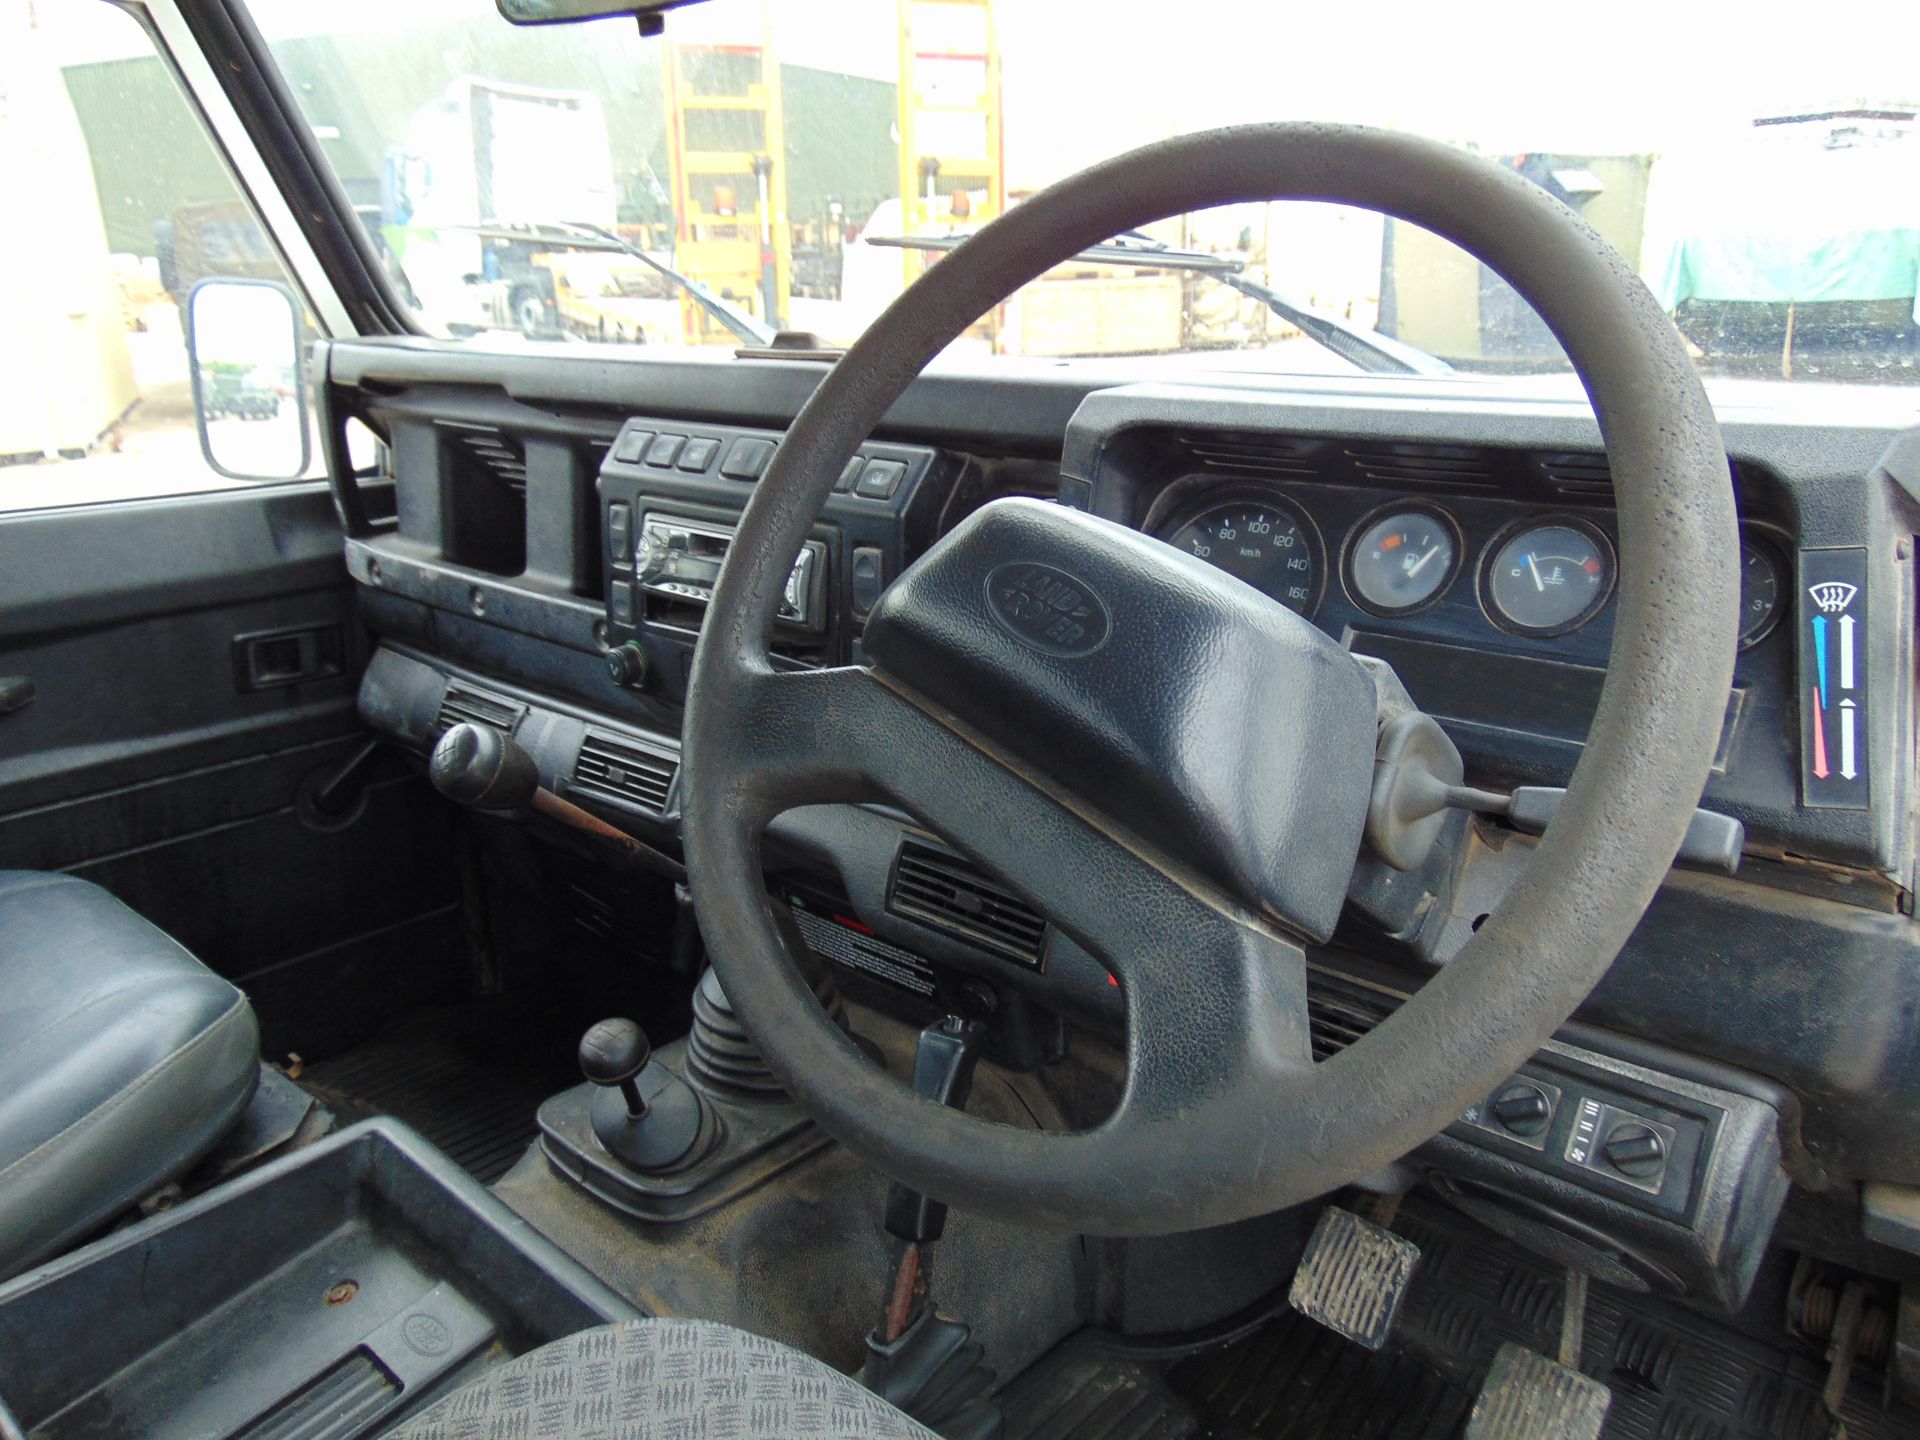 Land Rover 110 TD5 Station Wagon - Image 10 of 22